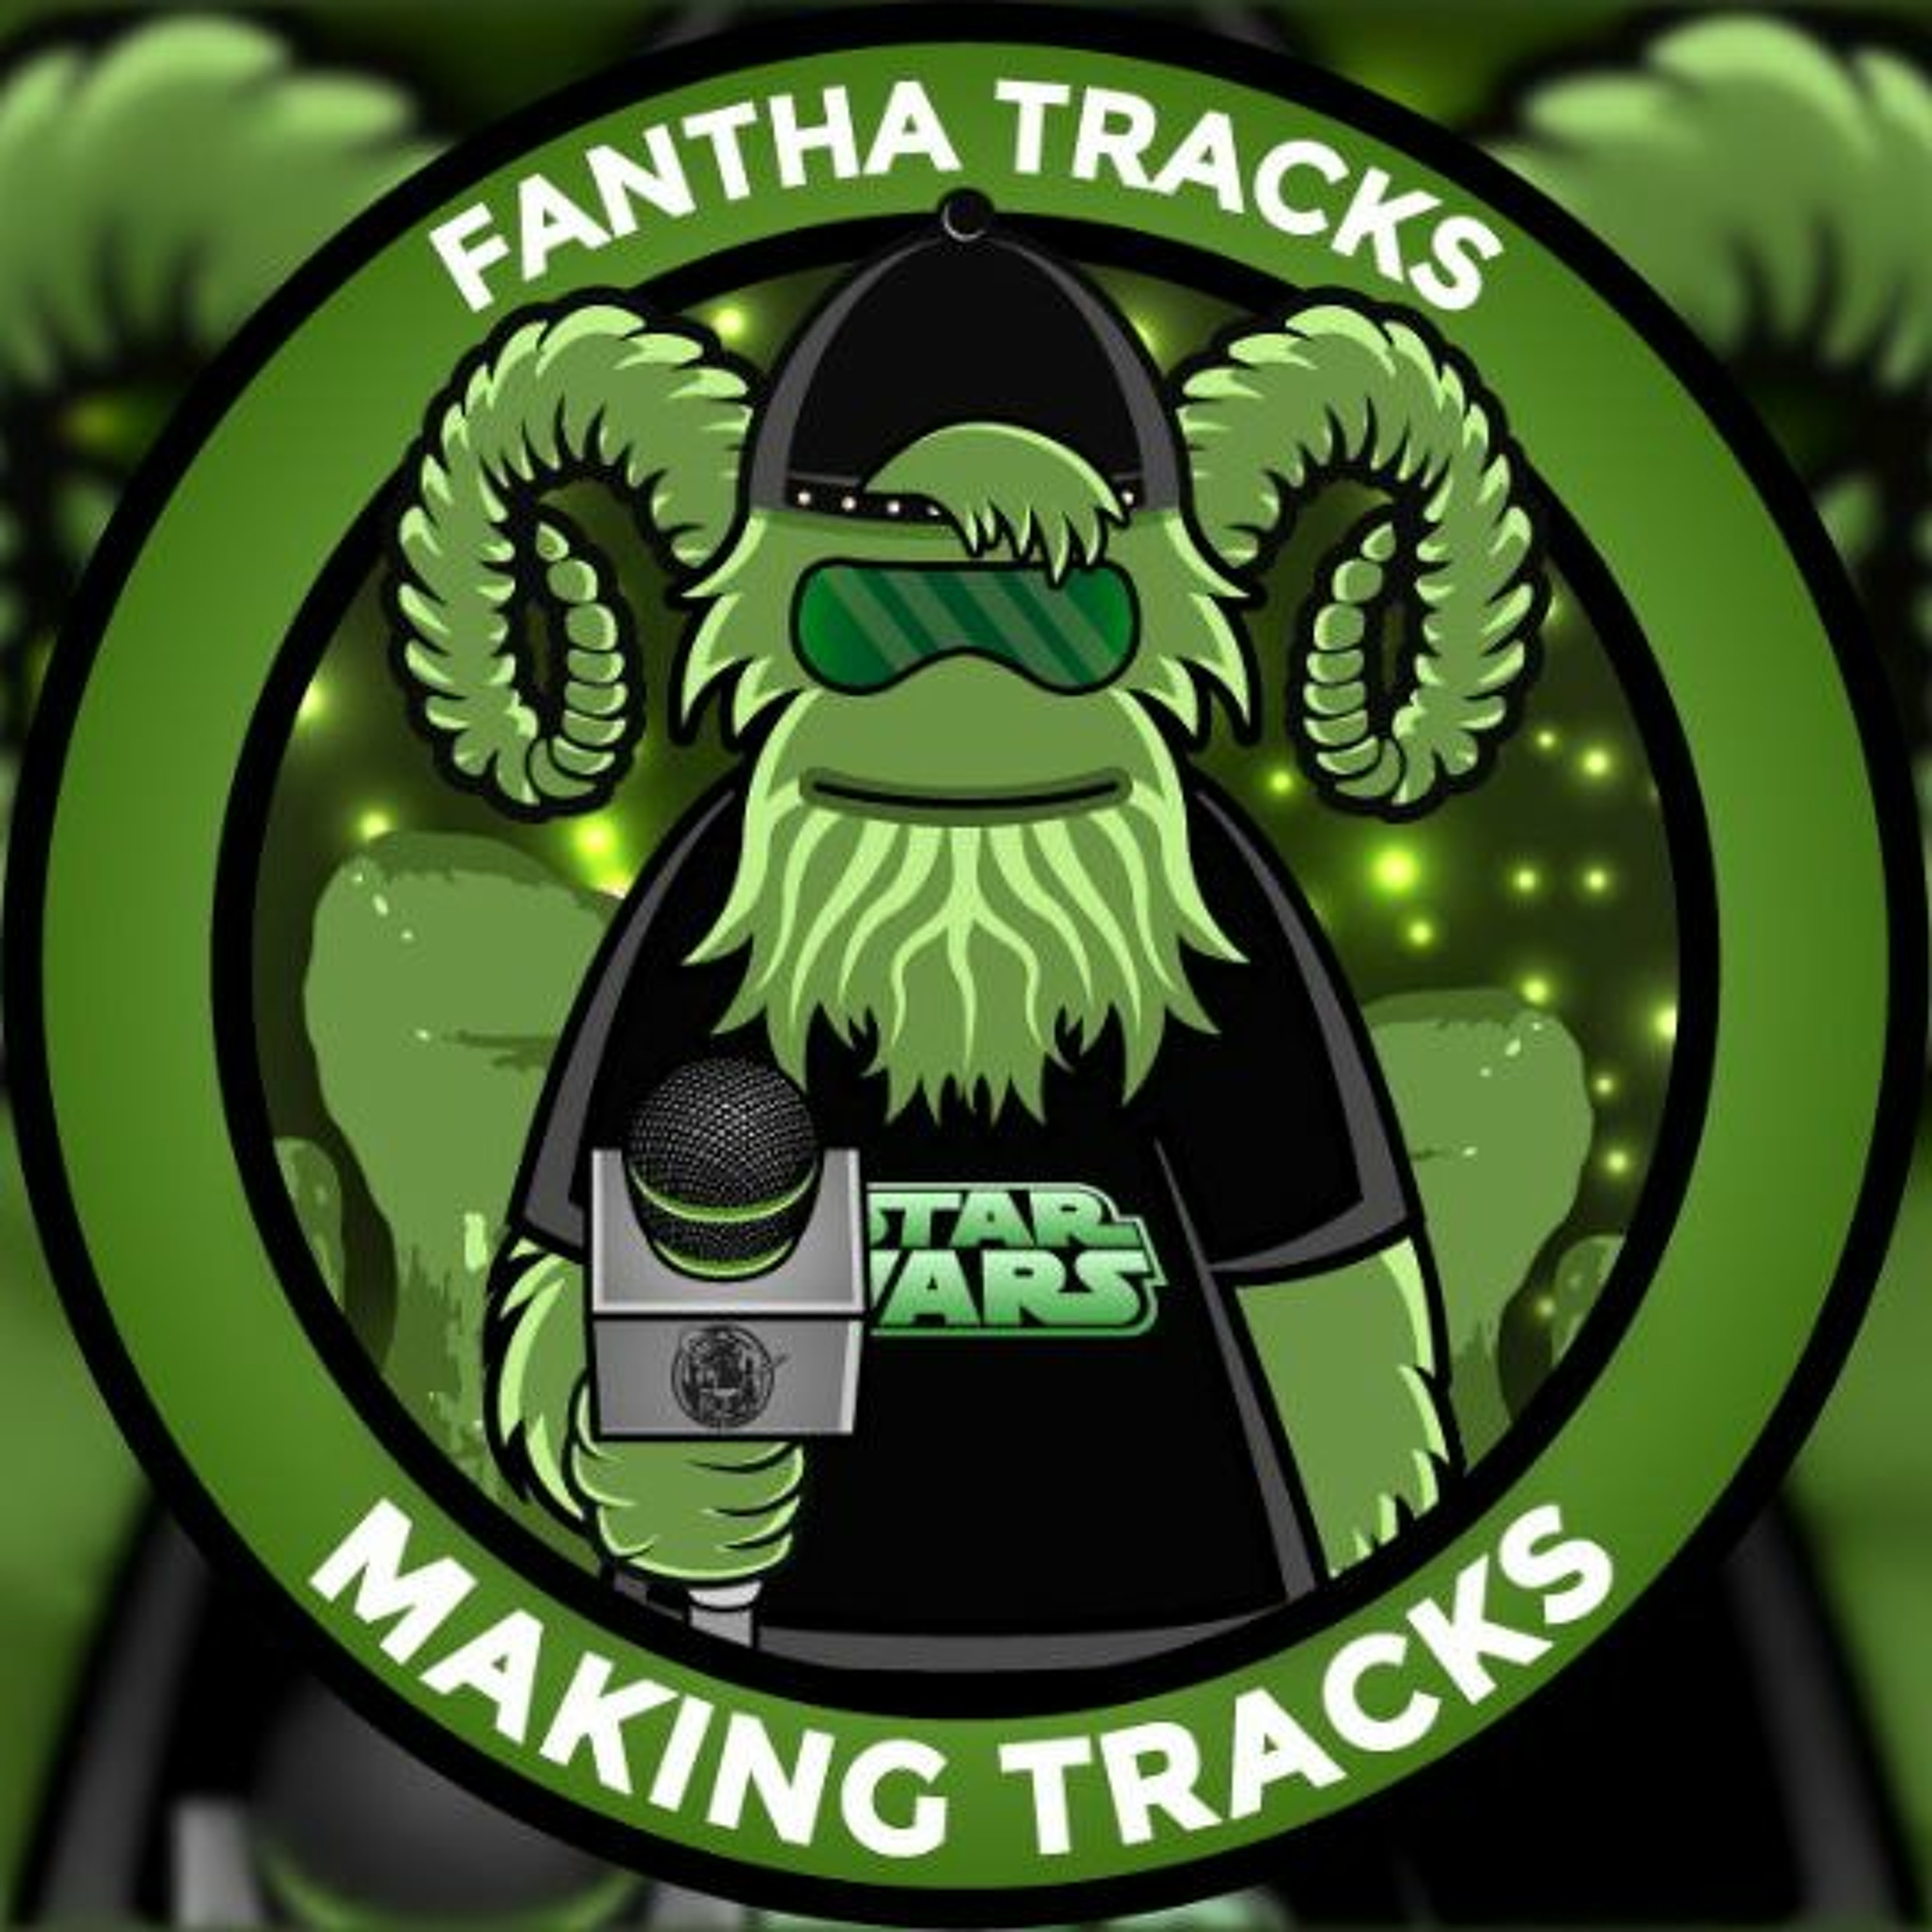 Making Tracks Episode 166: Because I can: With guest Phil Herbert